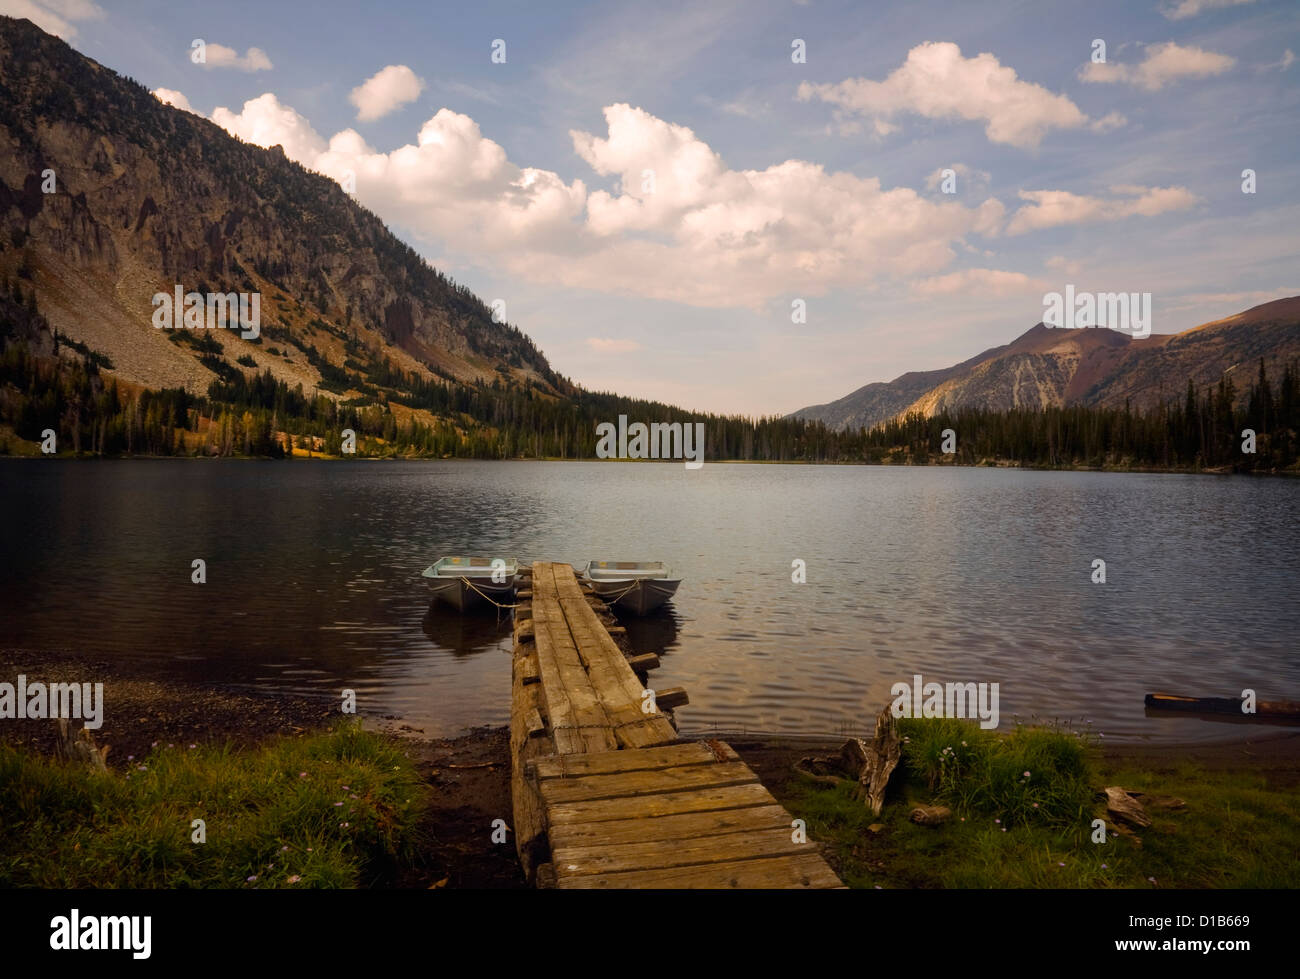 OREGON - Boat dock on Aneroid Lake in the Eagle Cap Wilderness of the Wallowa Mountains in the Wallowa-Whitman National Forest. Stock Photo